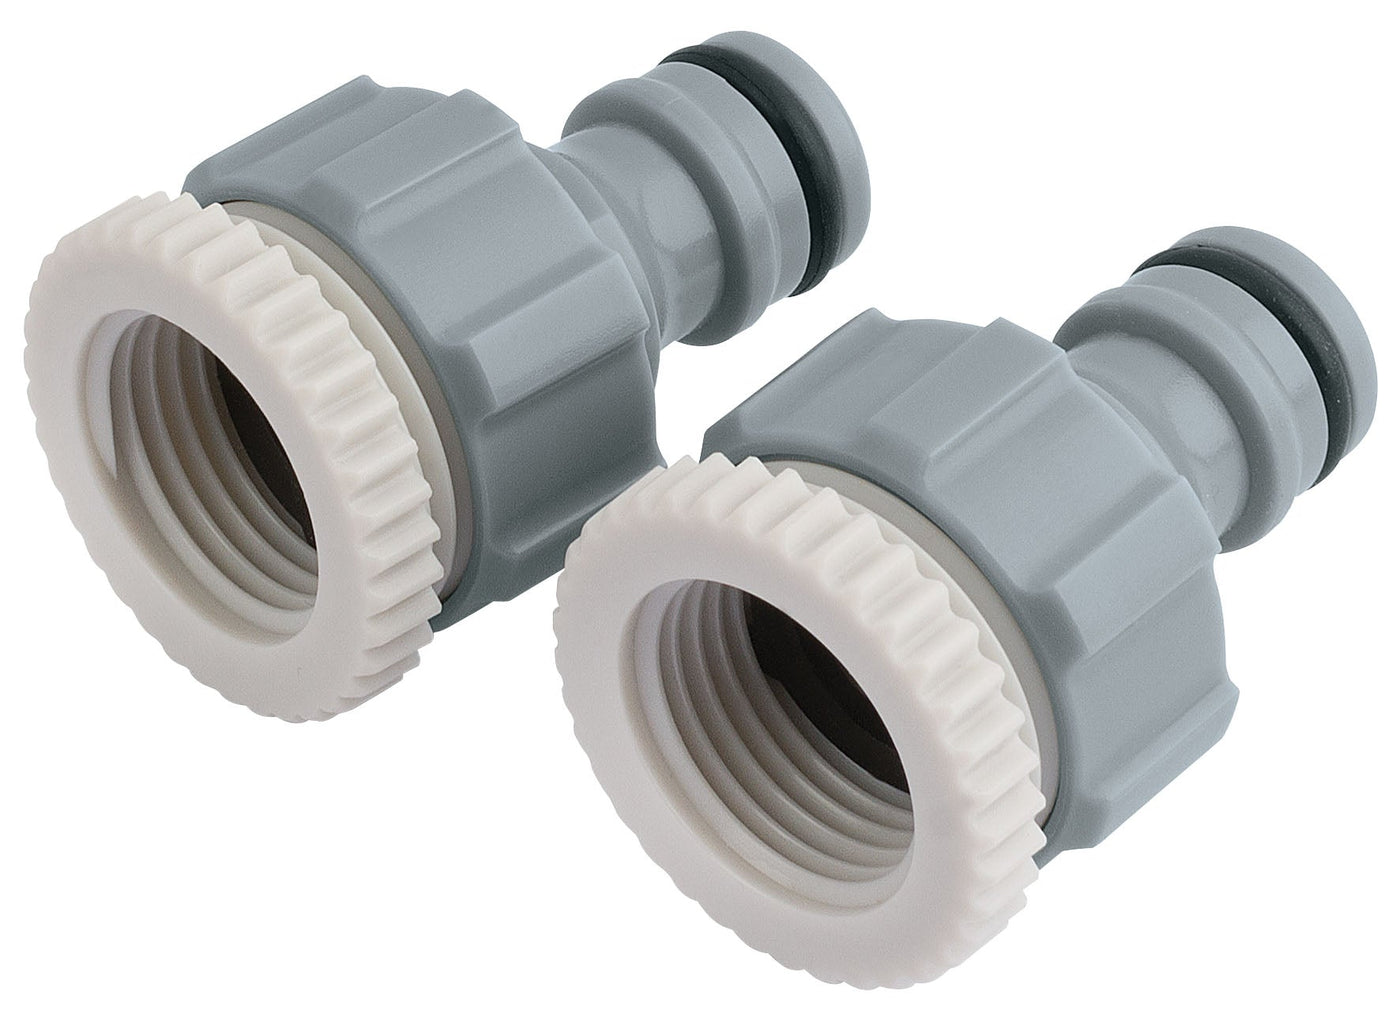 Draper 25907 Twin Pack of Tap Connectors (1/2" and 3/4")